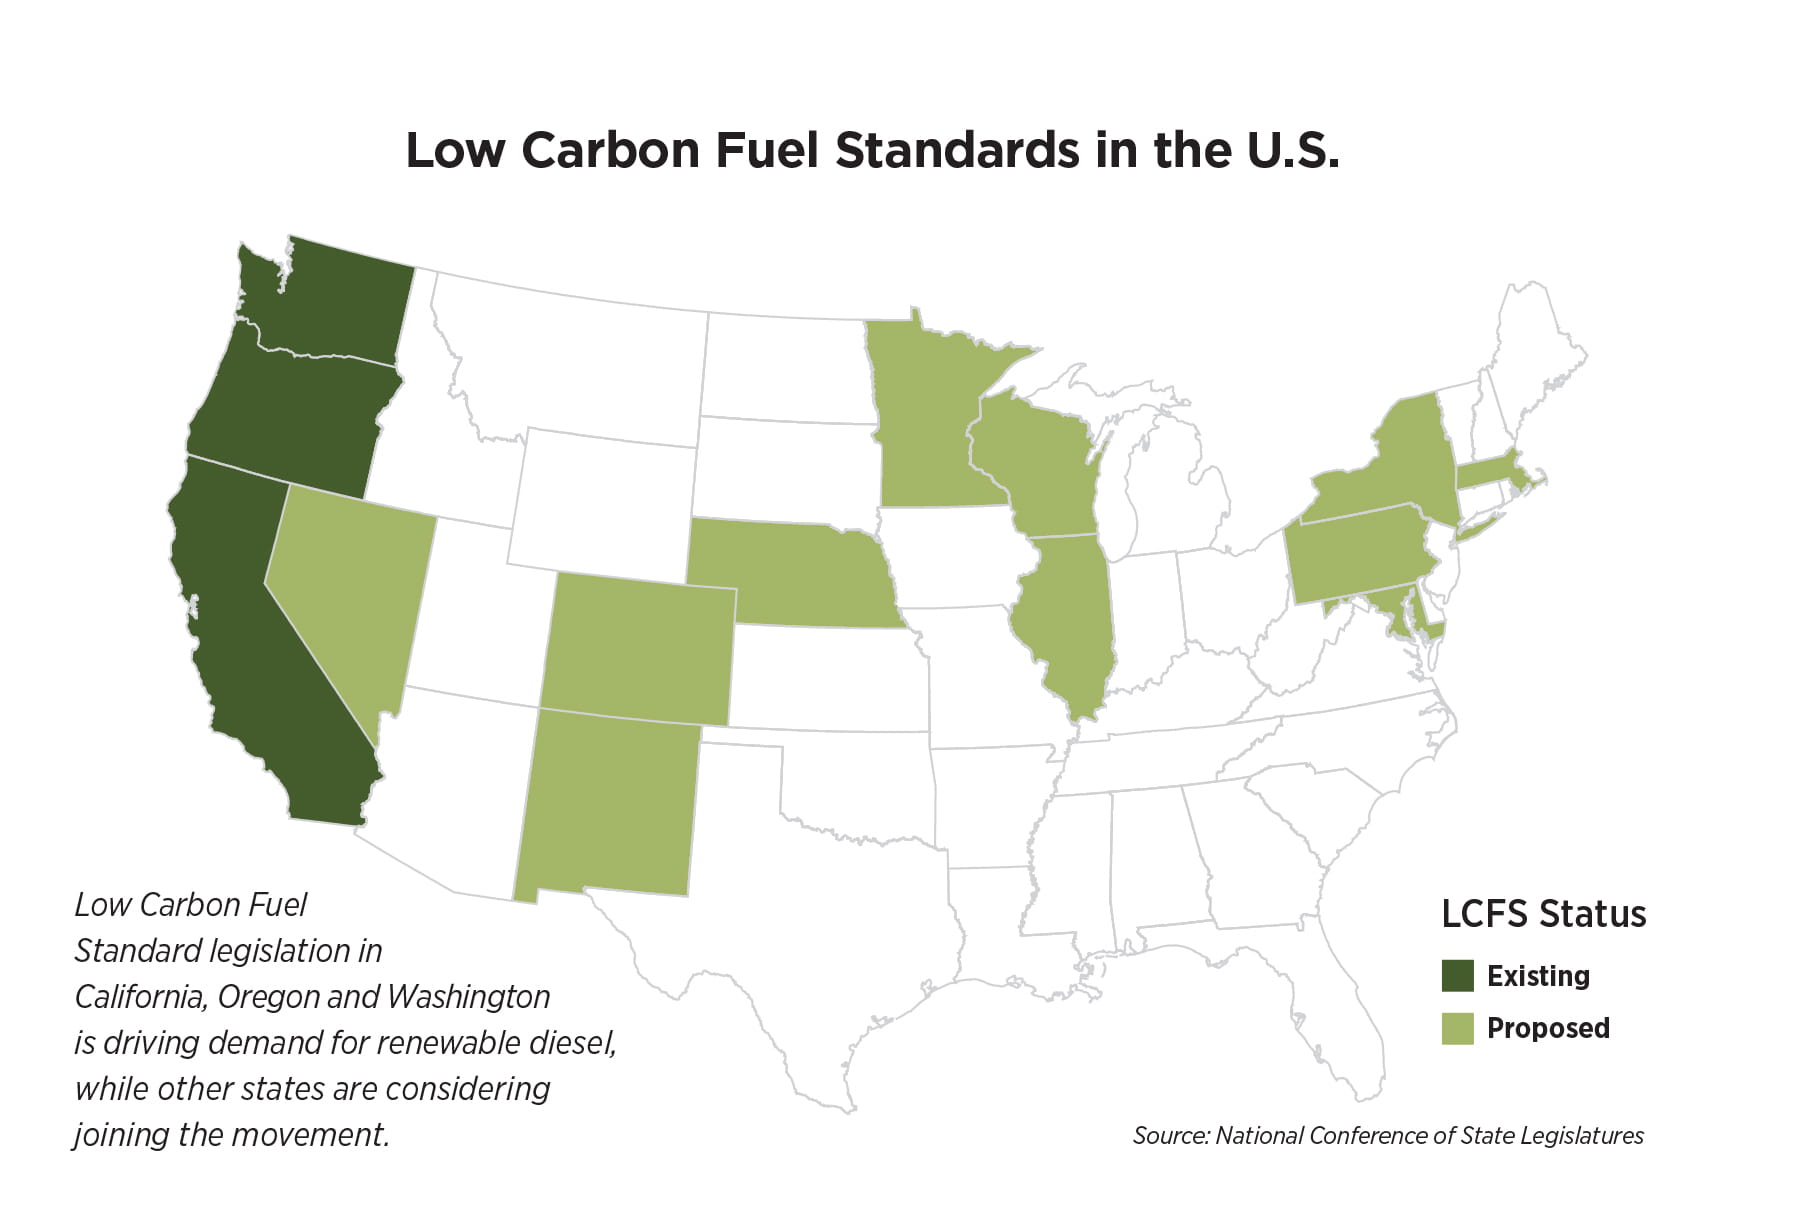 Map of United States showing states with existing and proposed low carbon fuels standards